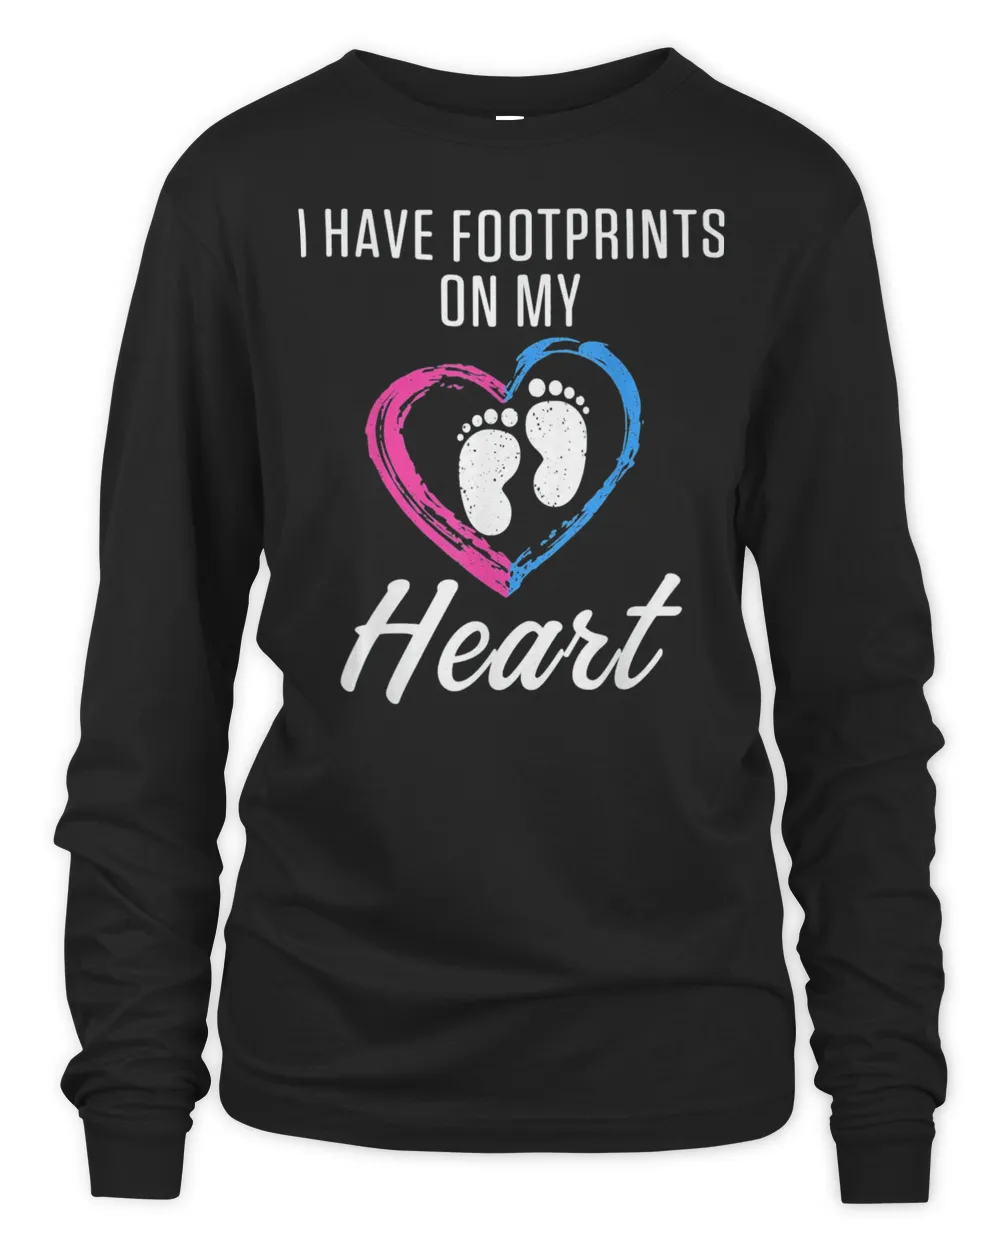 Infant Loss Foot Pregnancy Baby Miscarriage T-Shirt